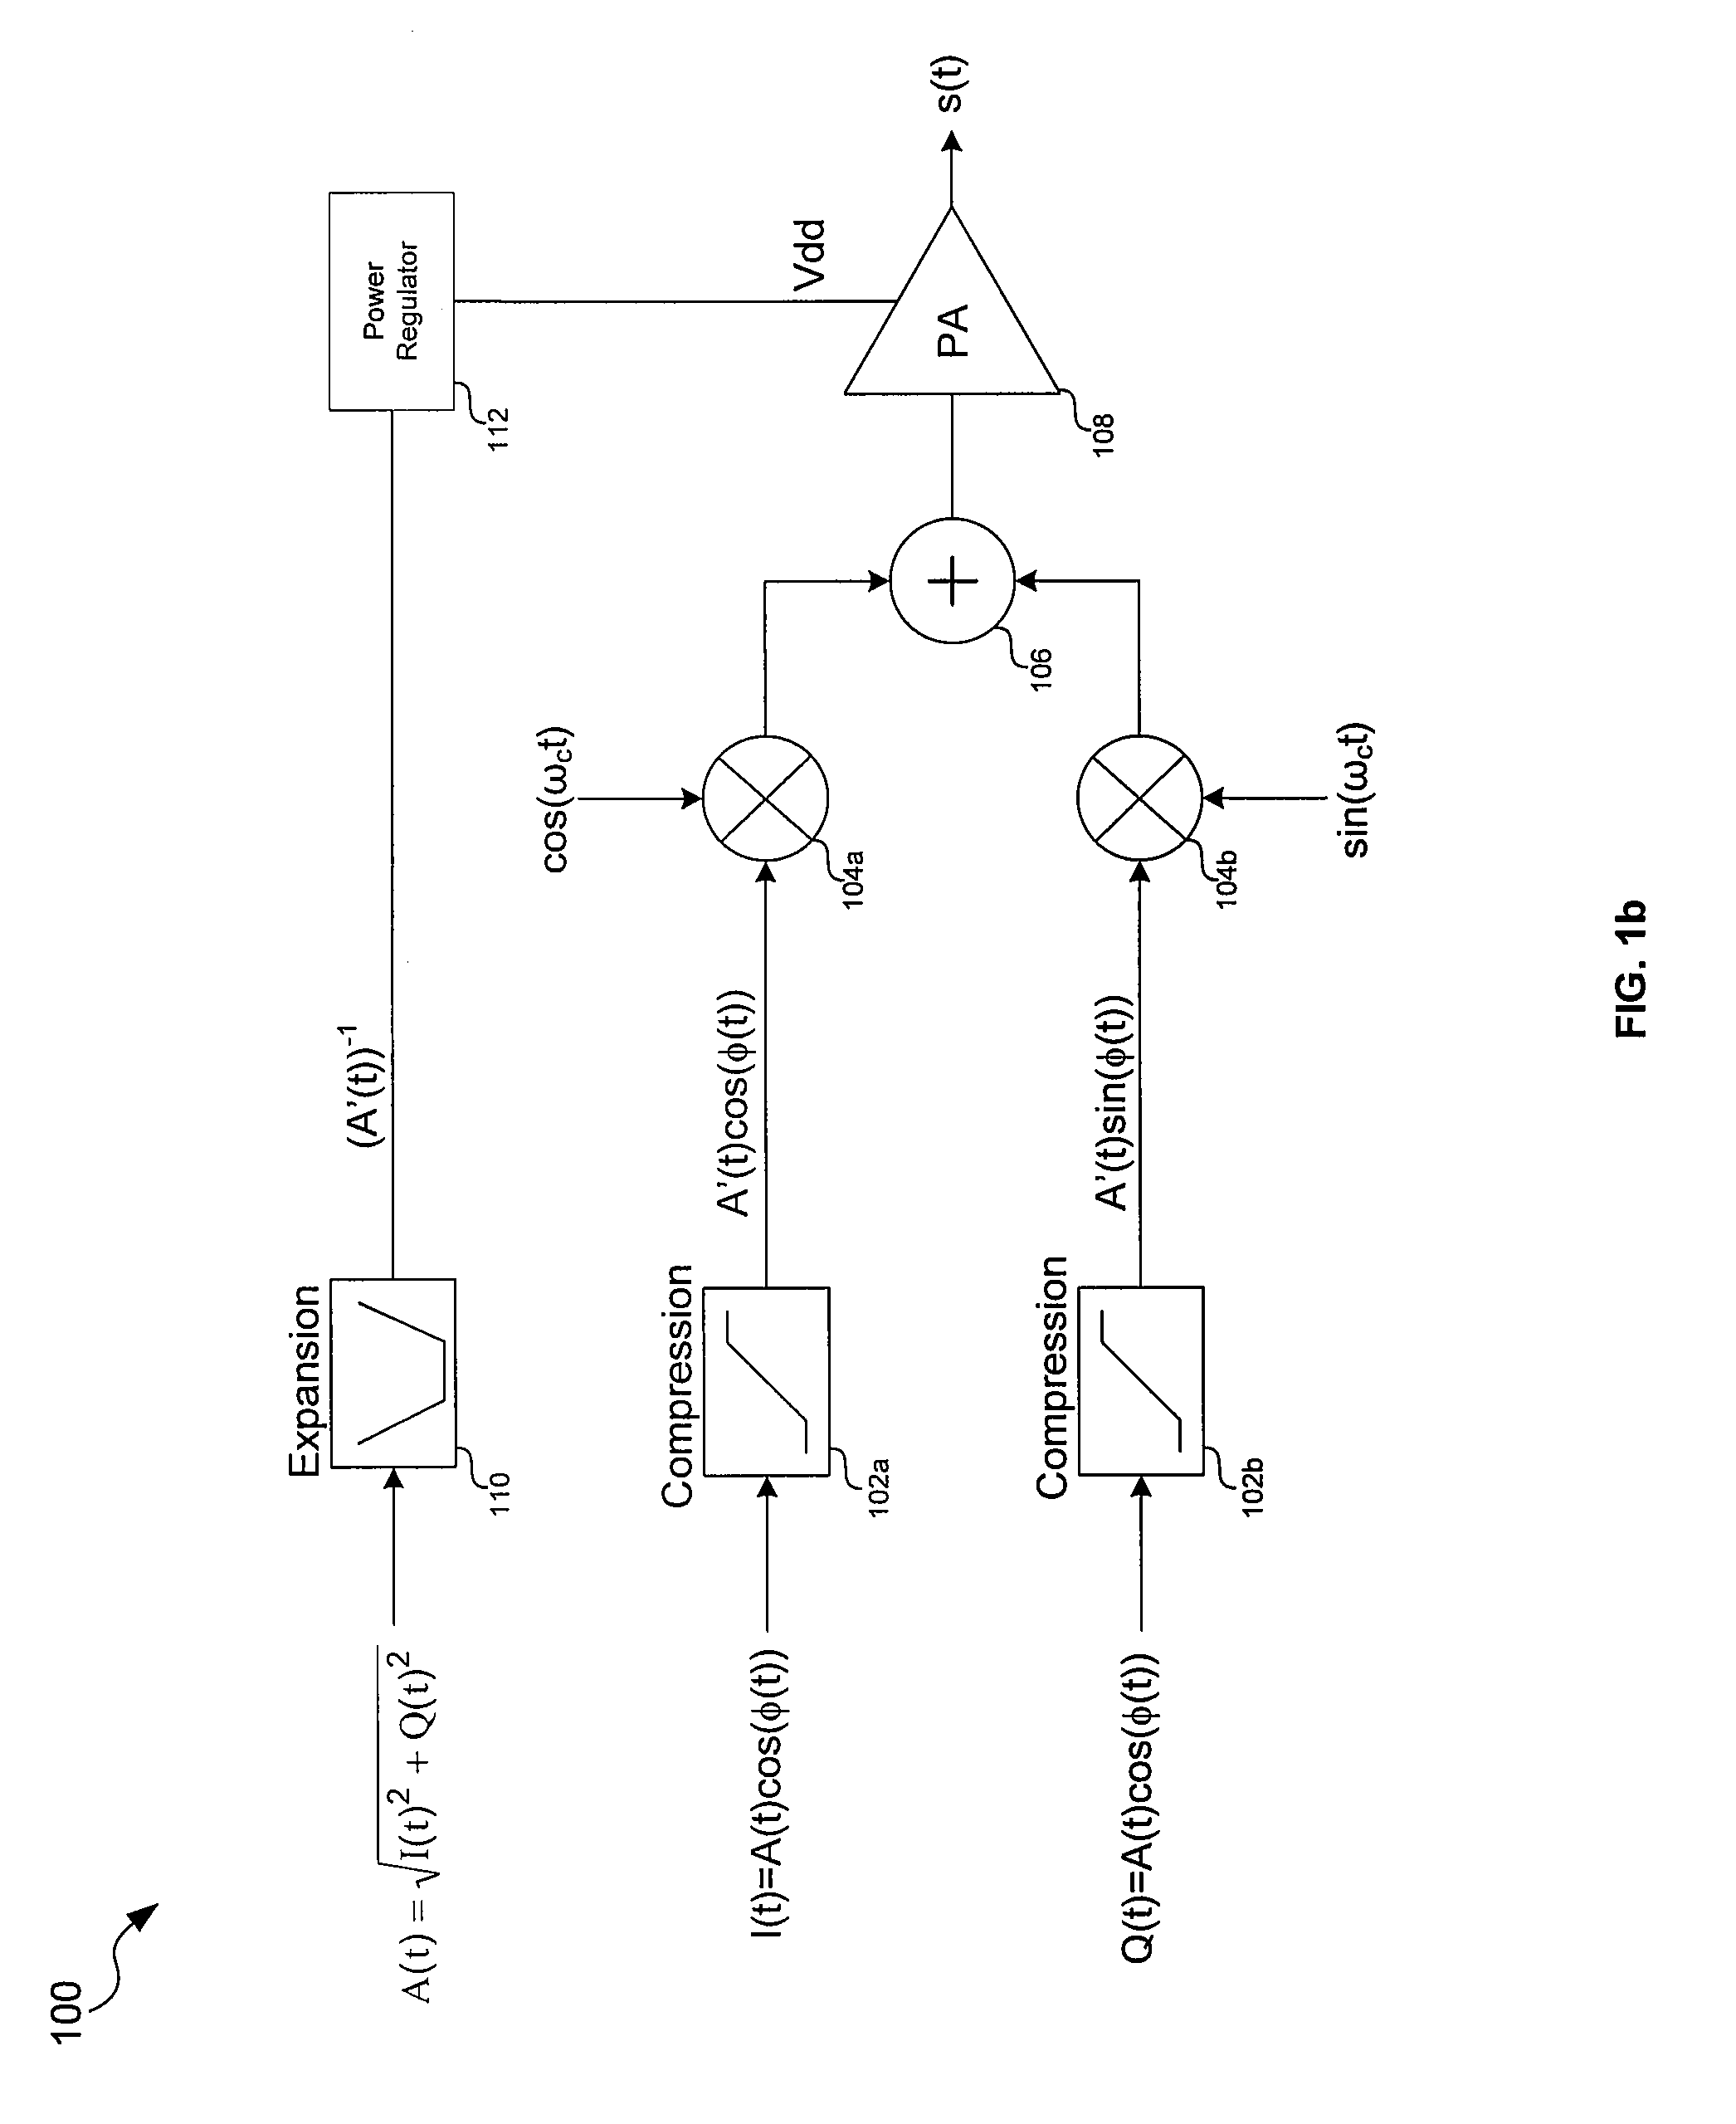 Method and system for extending dynamic range of an RF signal